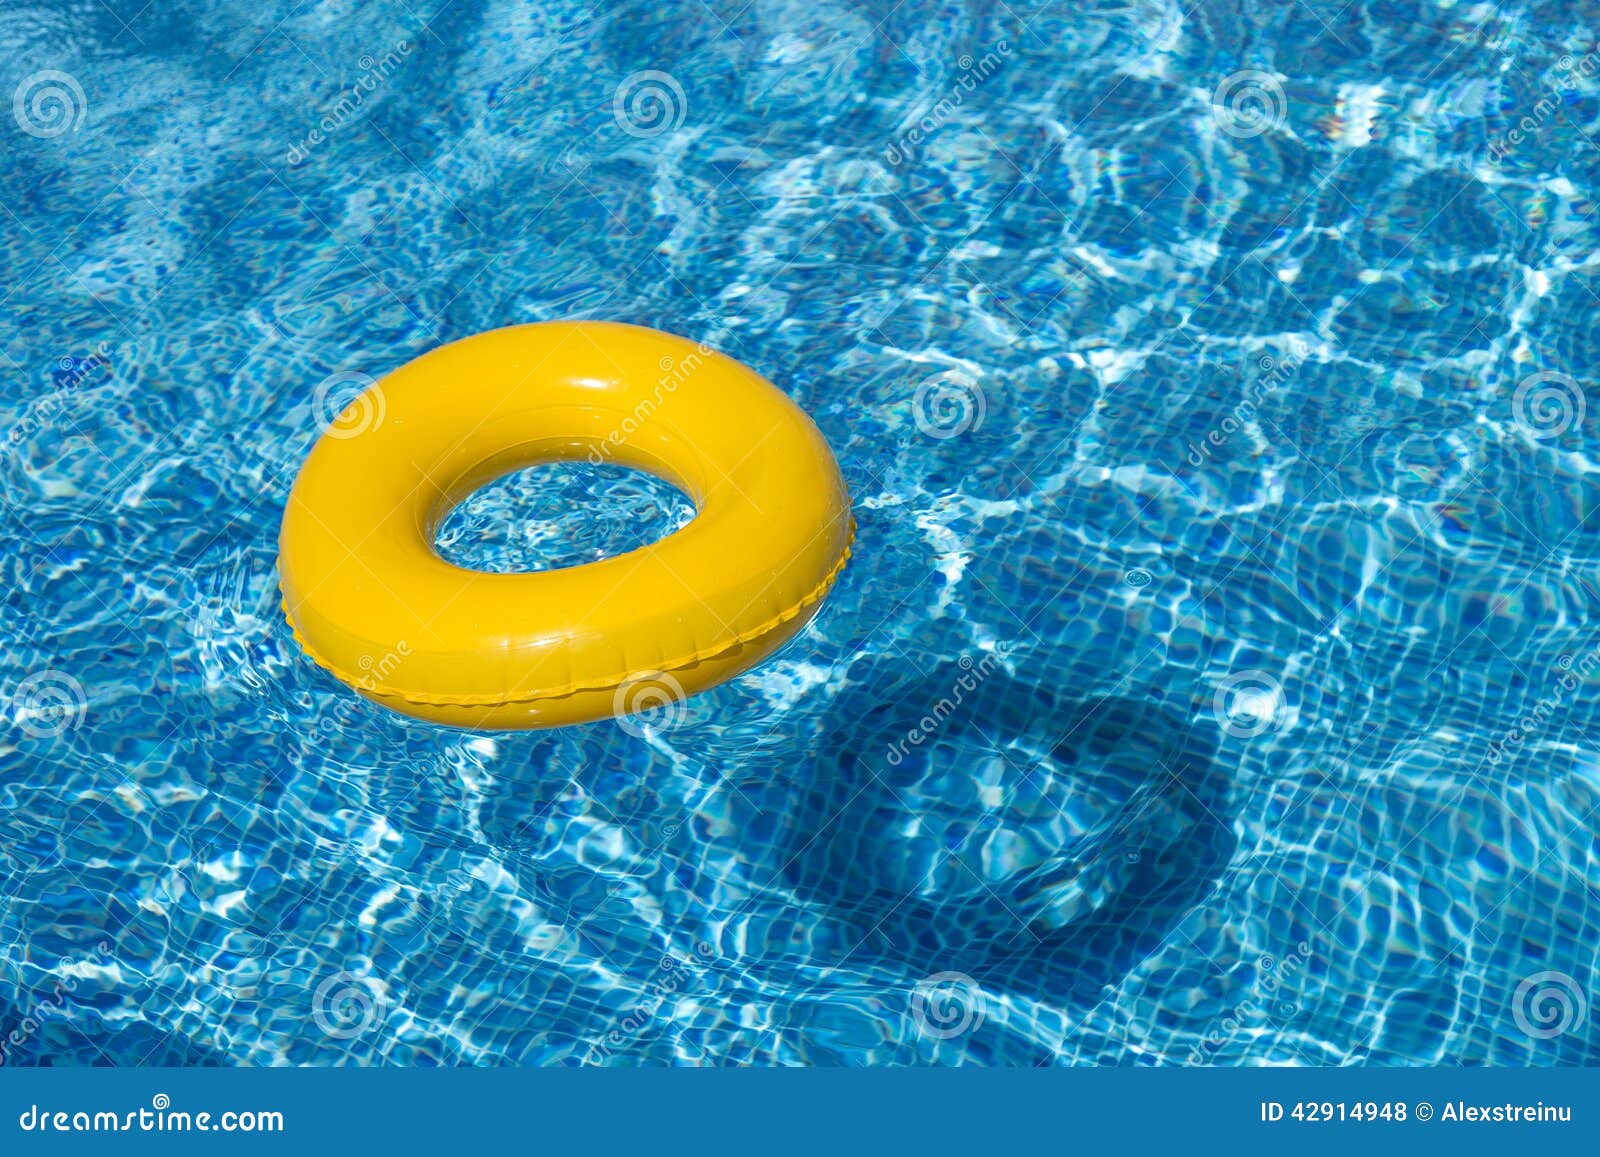 Yellow Pool Float, Pool Ring in Cool Blue Refreshi Stock Photo - Image ...